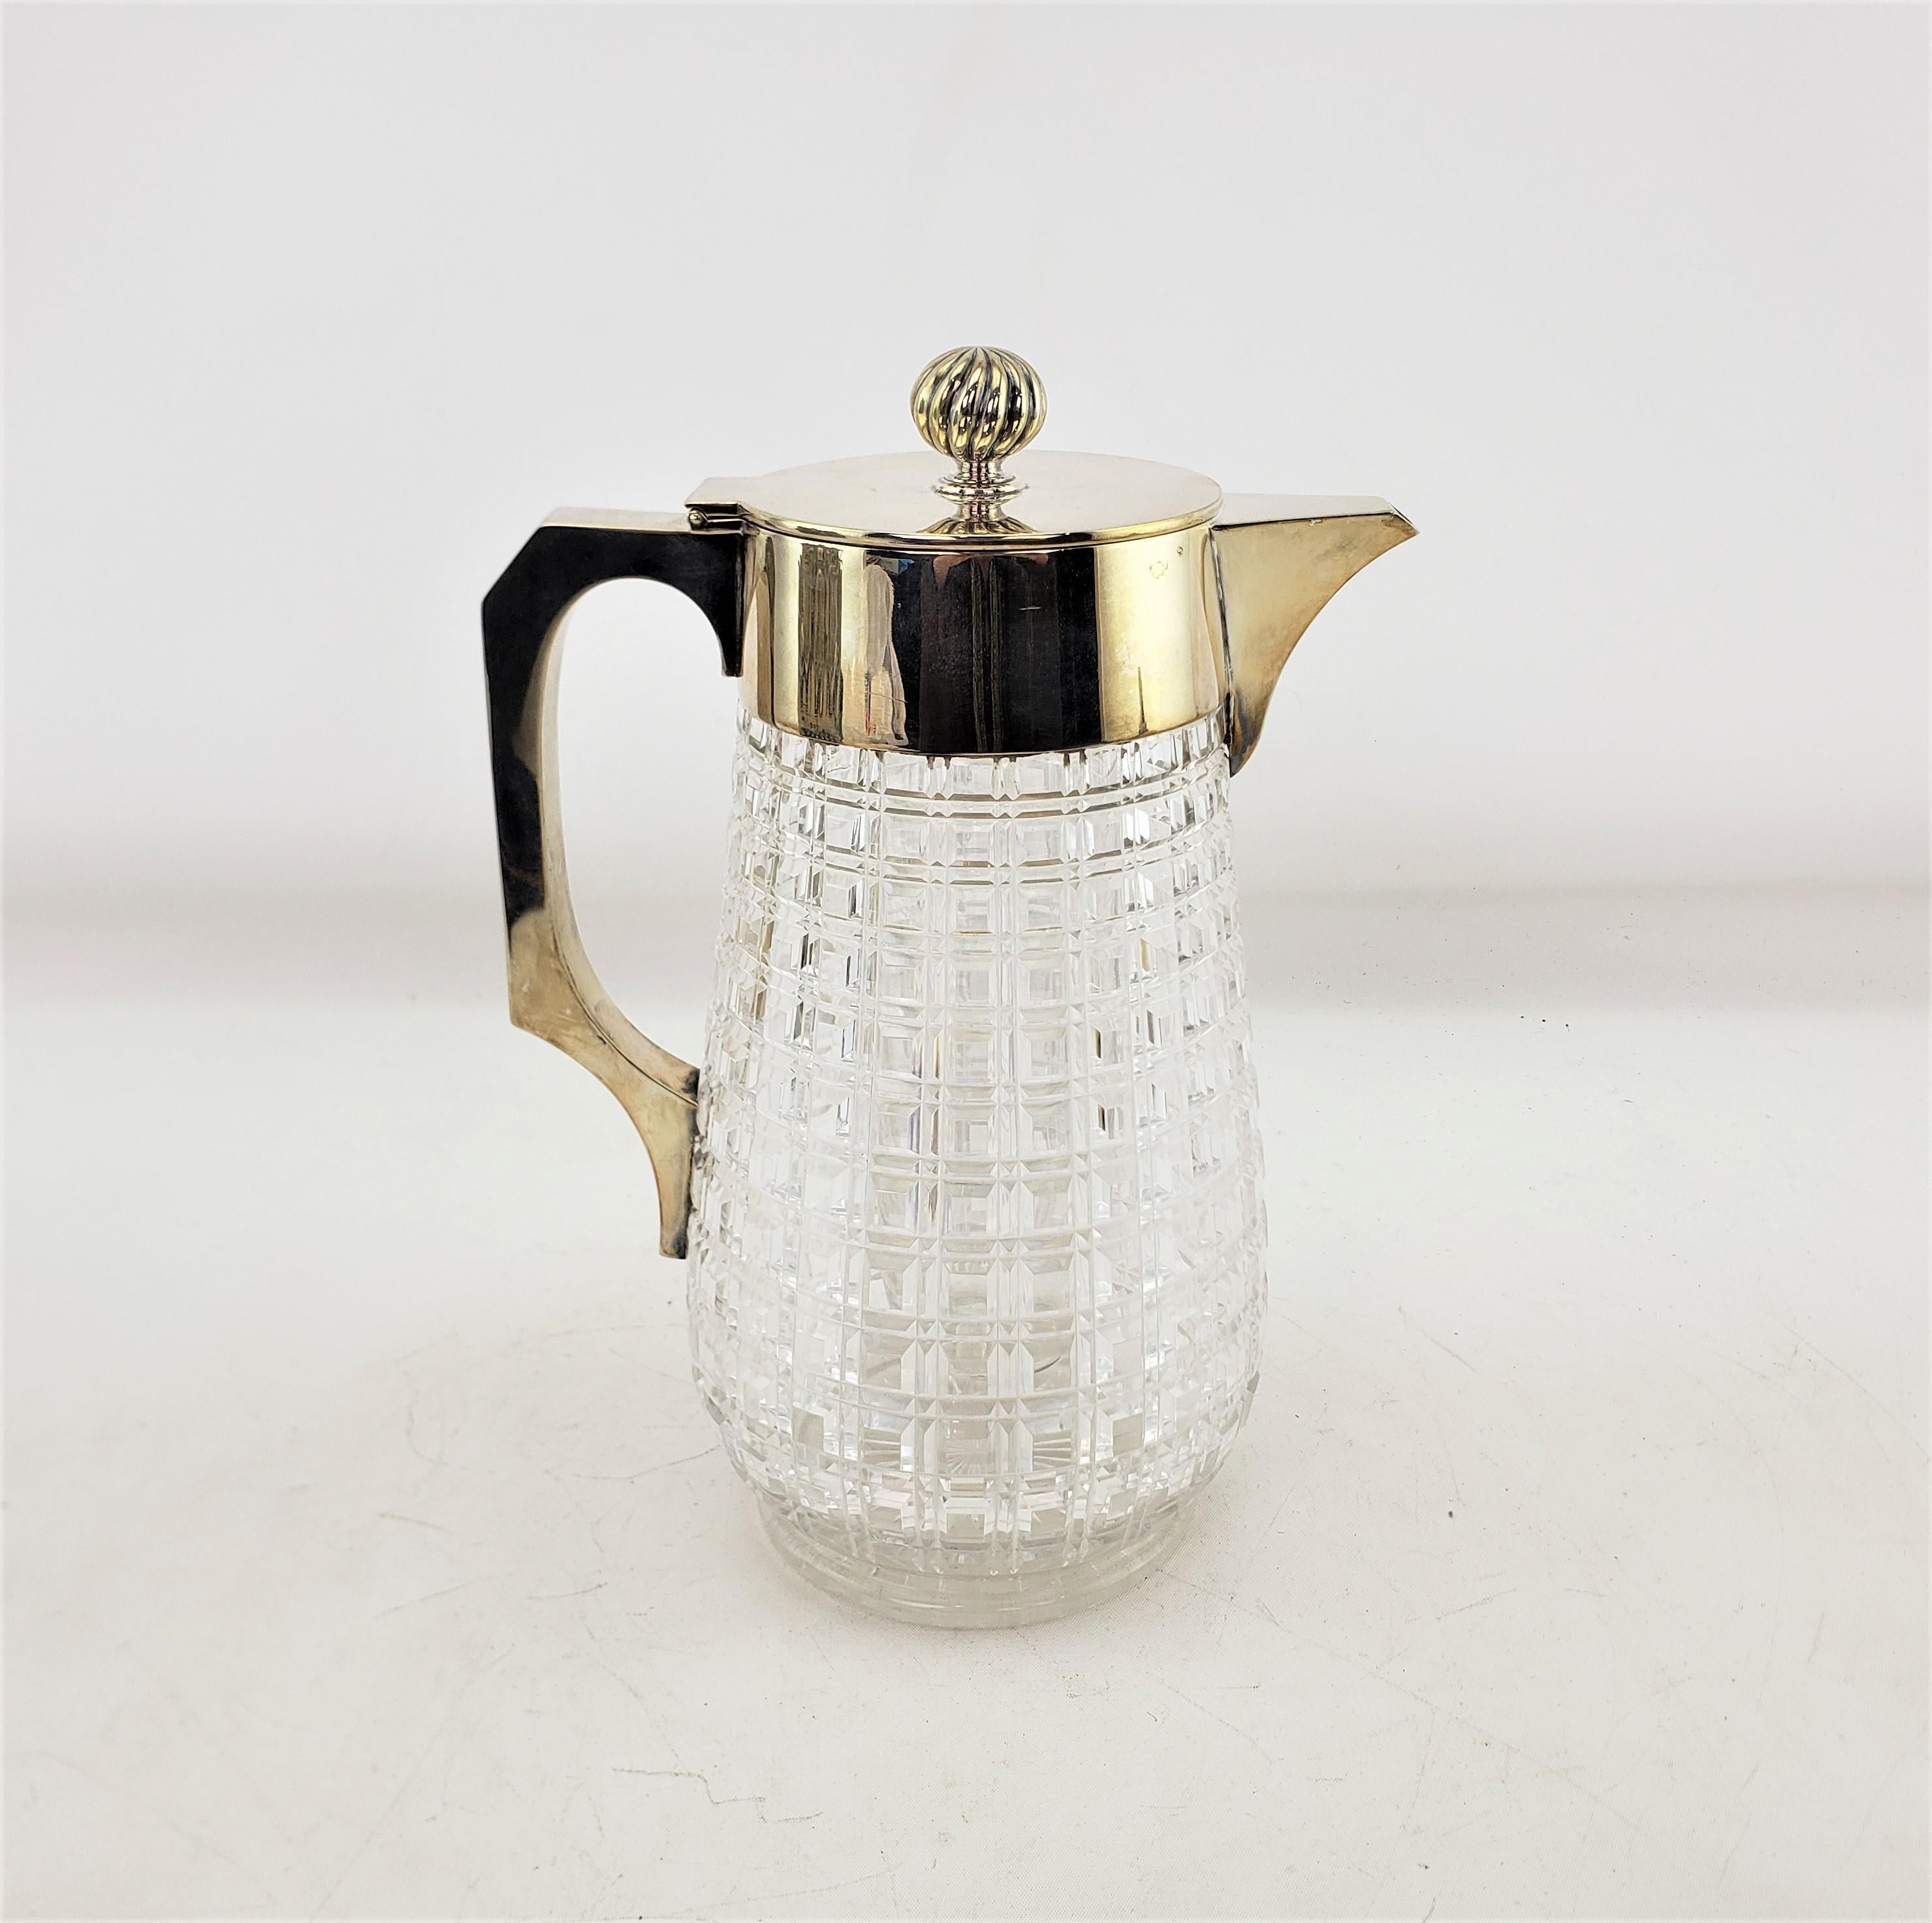 This antique claret jug is hallmarked by an unknown maker, and originated from England and dates toa apprximately 1920 and done in the period Art Deco style. The jug is composed of heavy faceted lead crystal with a well constructed handle and hinged